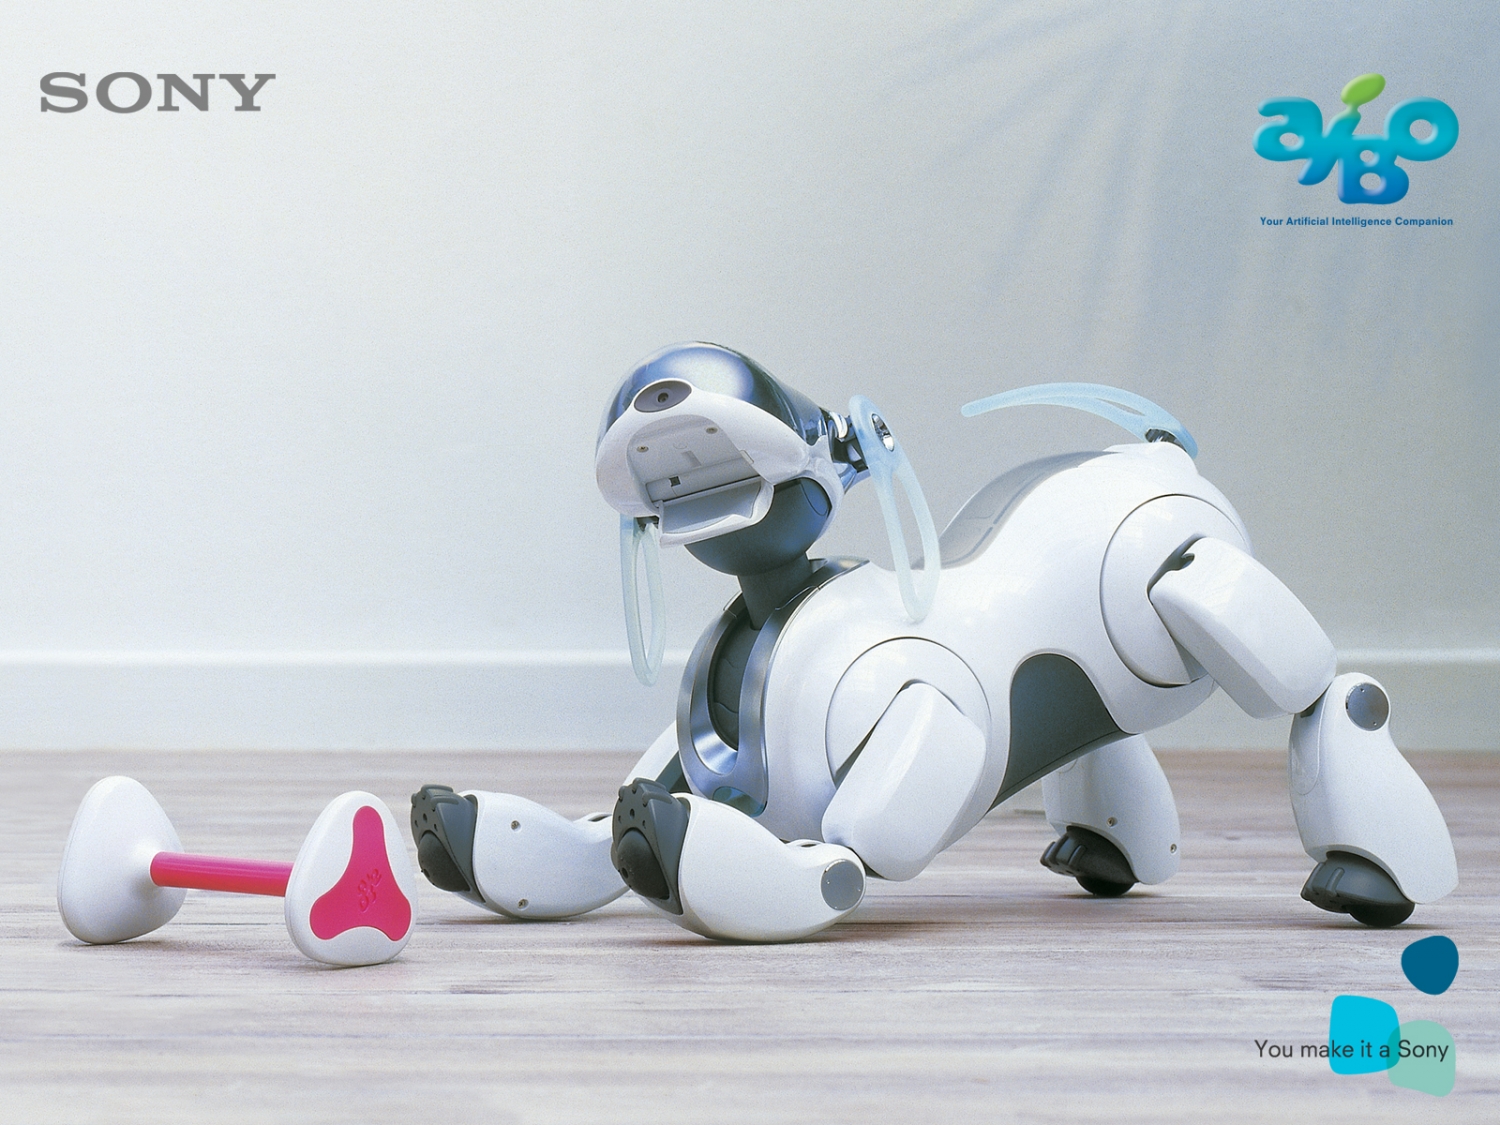 Programm Software Memory Stick English Edition Sony Aibo Ers-7Mind 3 SP